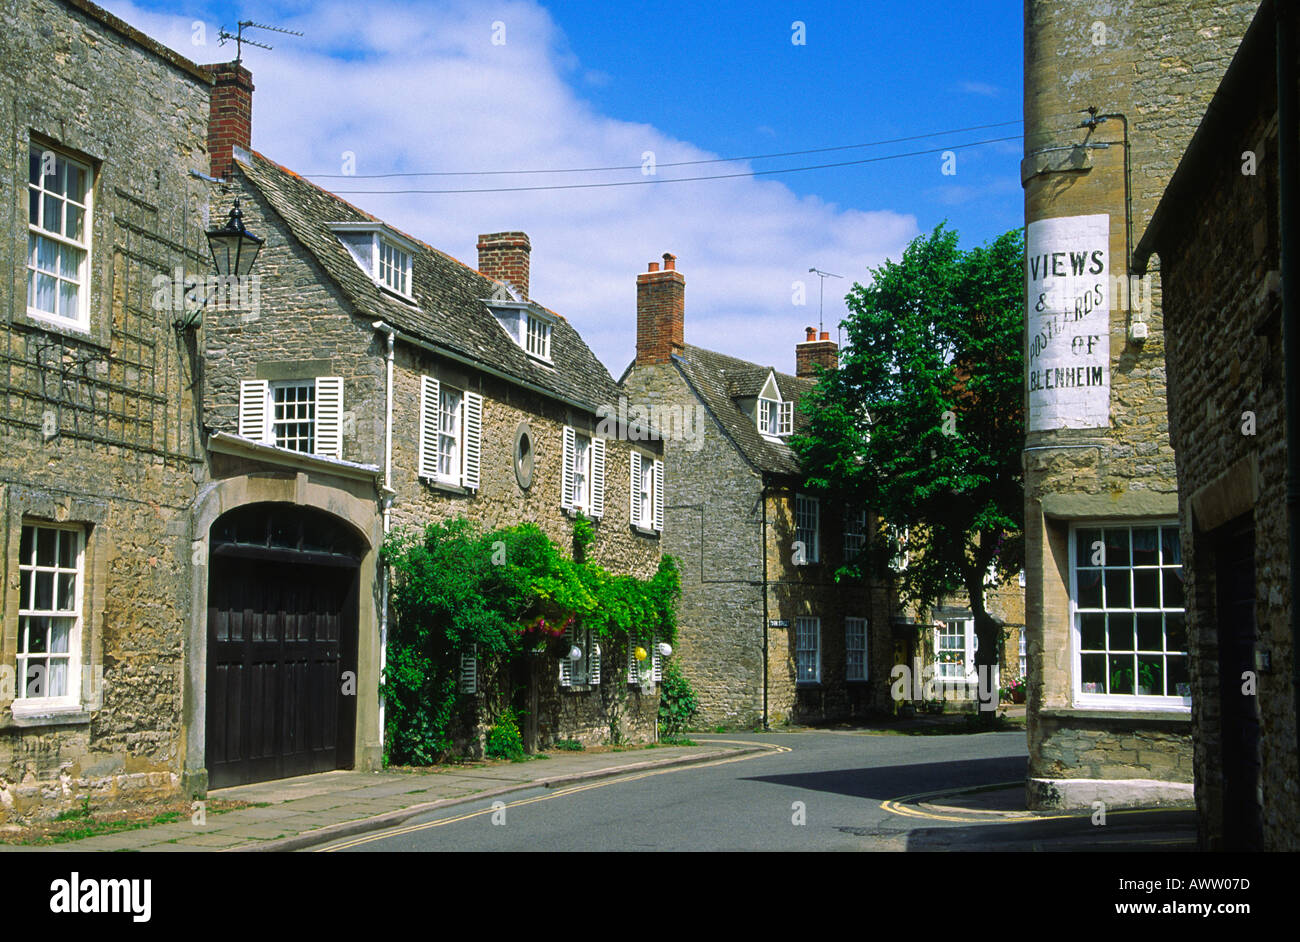 Stone Houses Cottages And Shops Woodstock Oxfordshire England